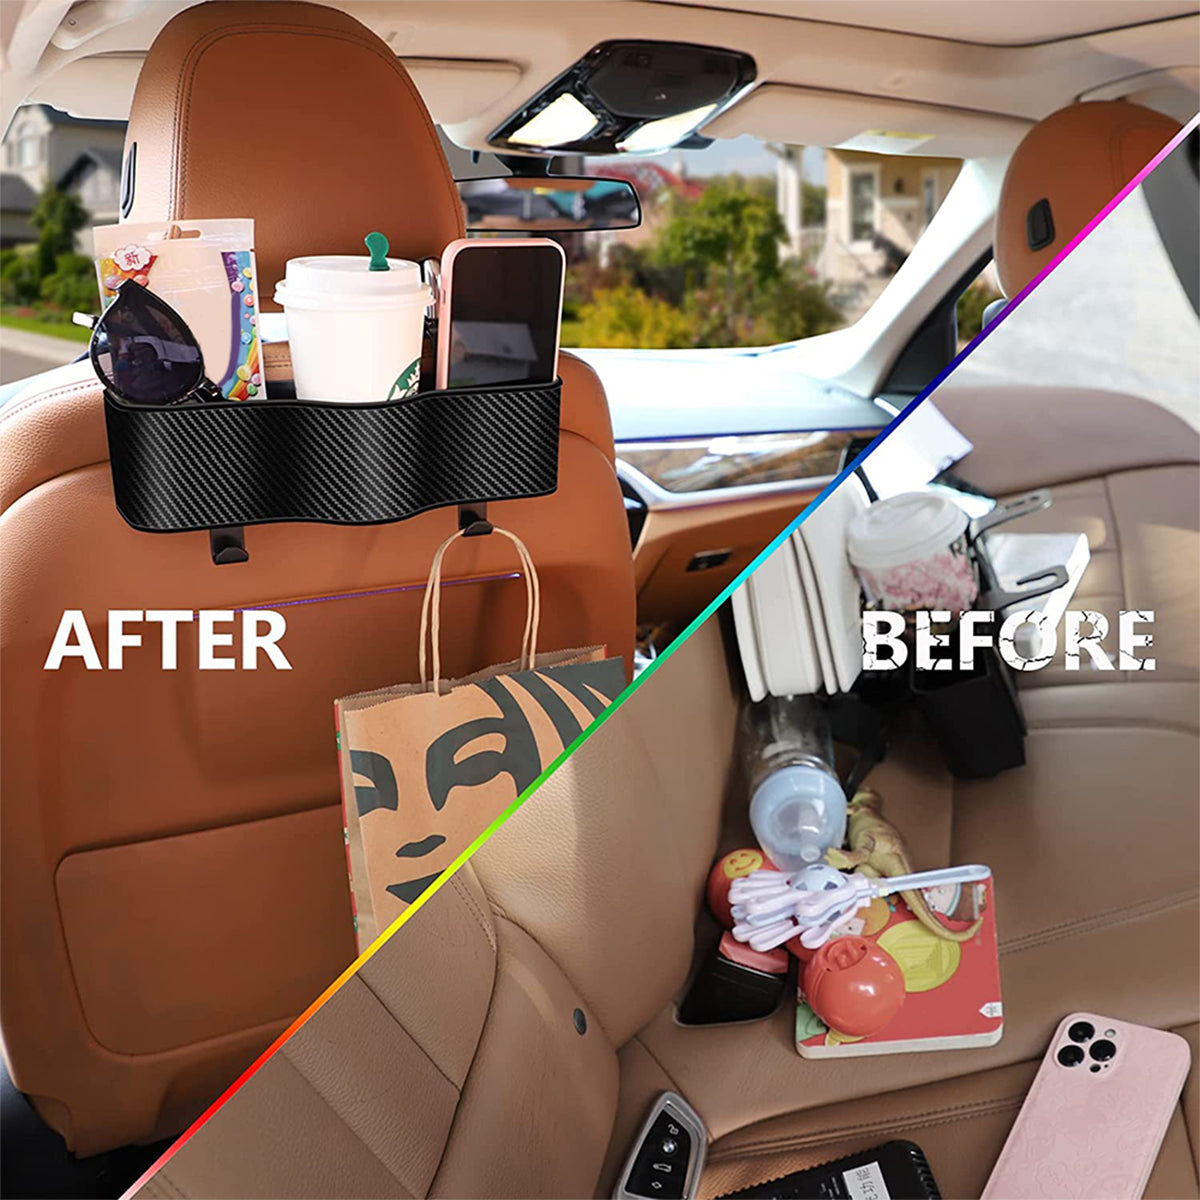 Car Headrest Backseat Organizer with Cup Holders, Custom-Fit For Car, Seat Back Organizer Perfect for Eating in Your Car, Back Seat Organizer for Kids RA242